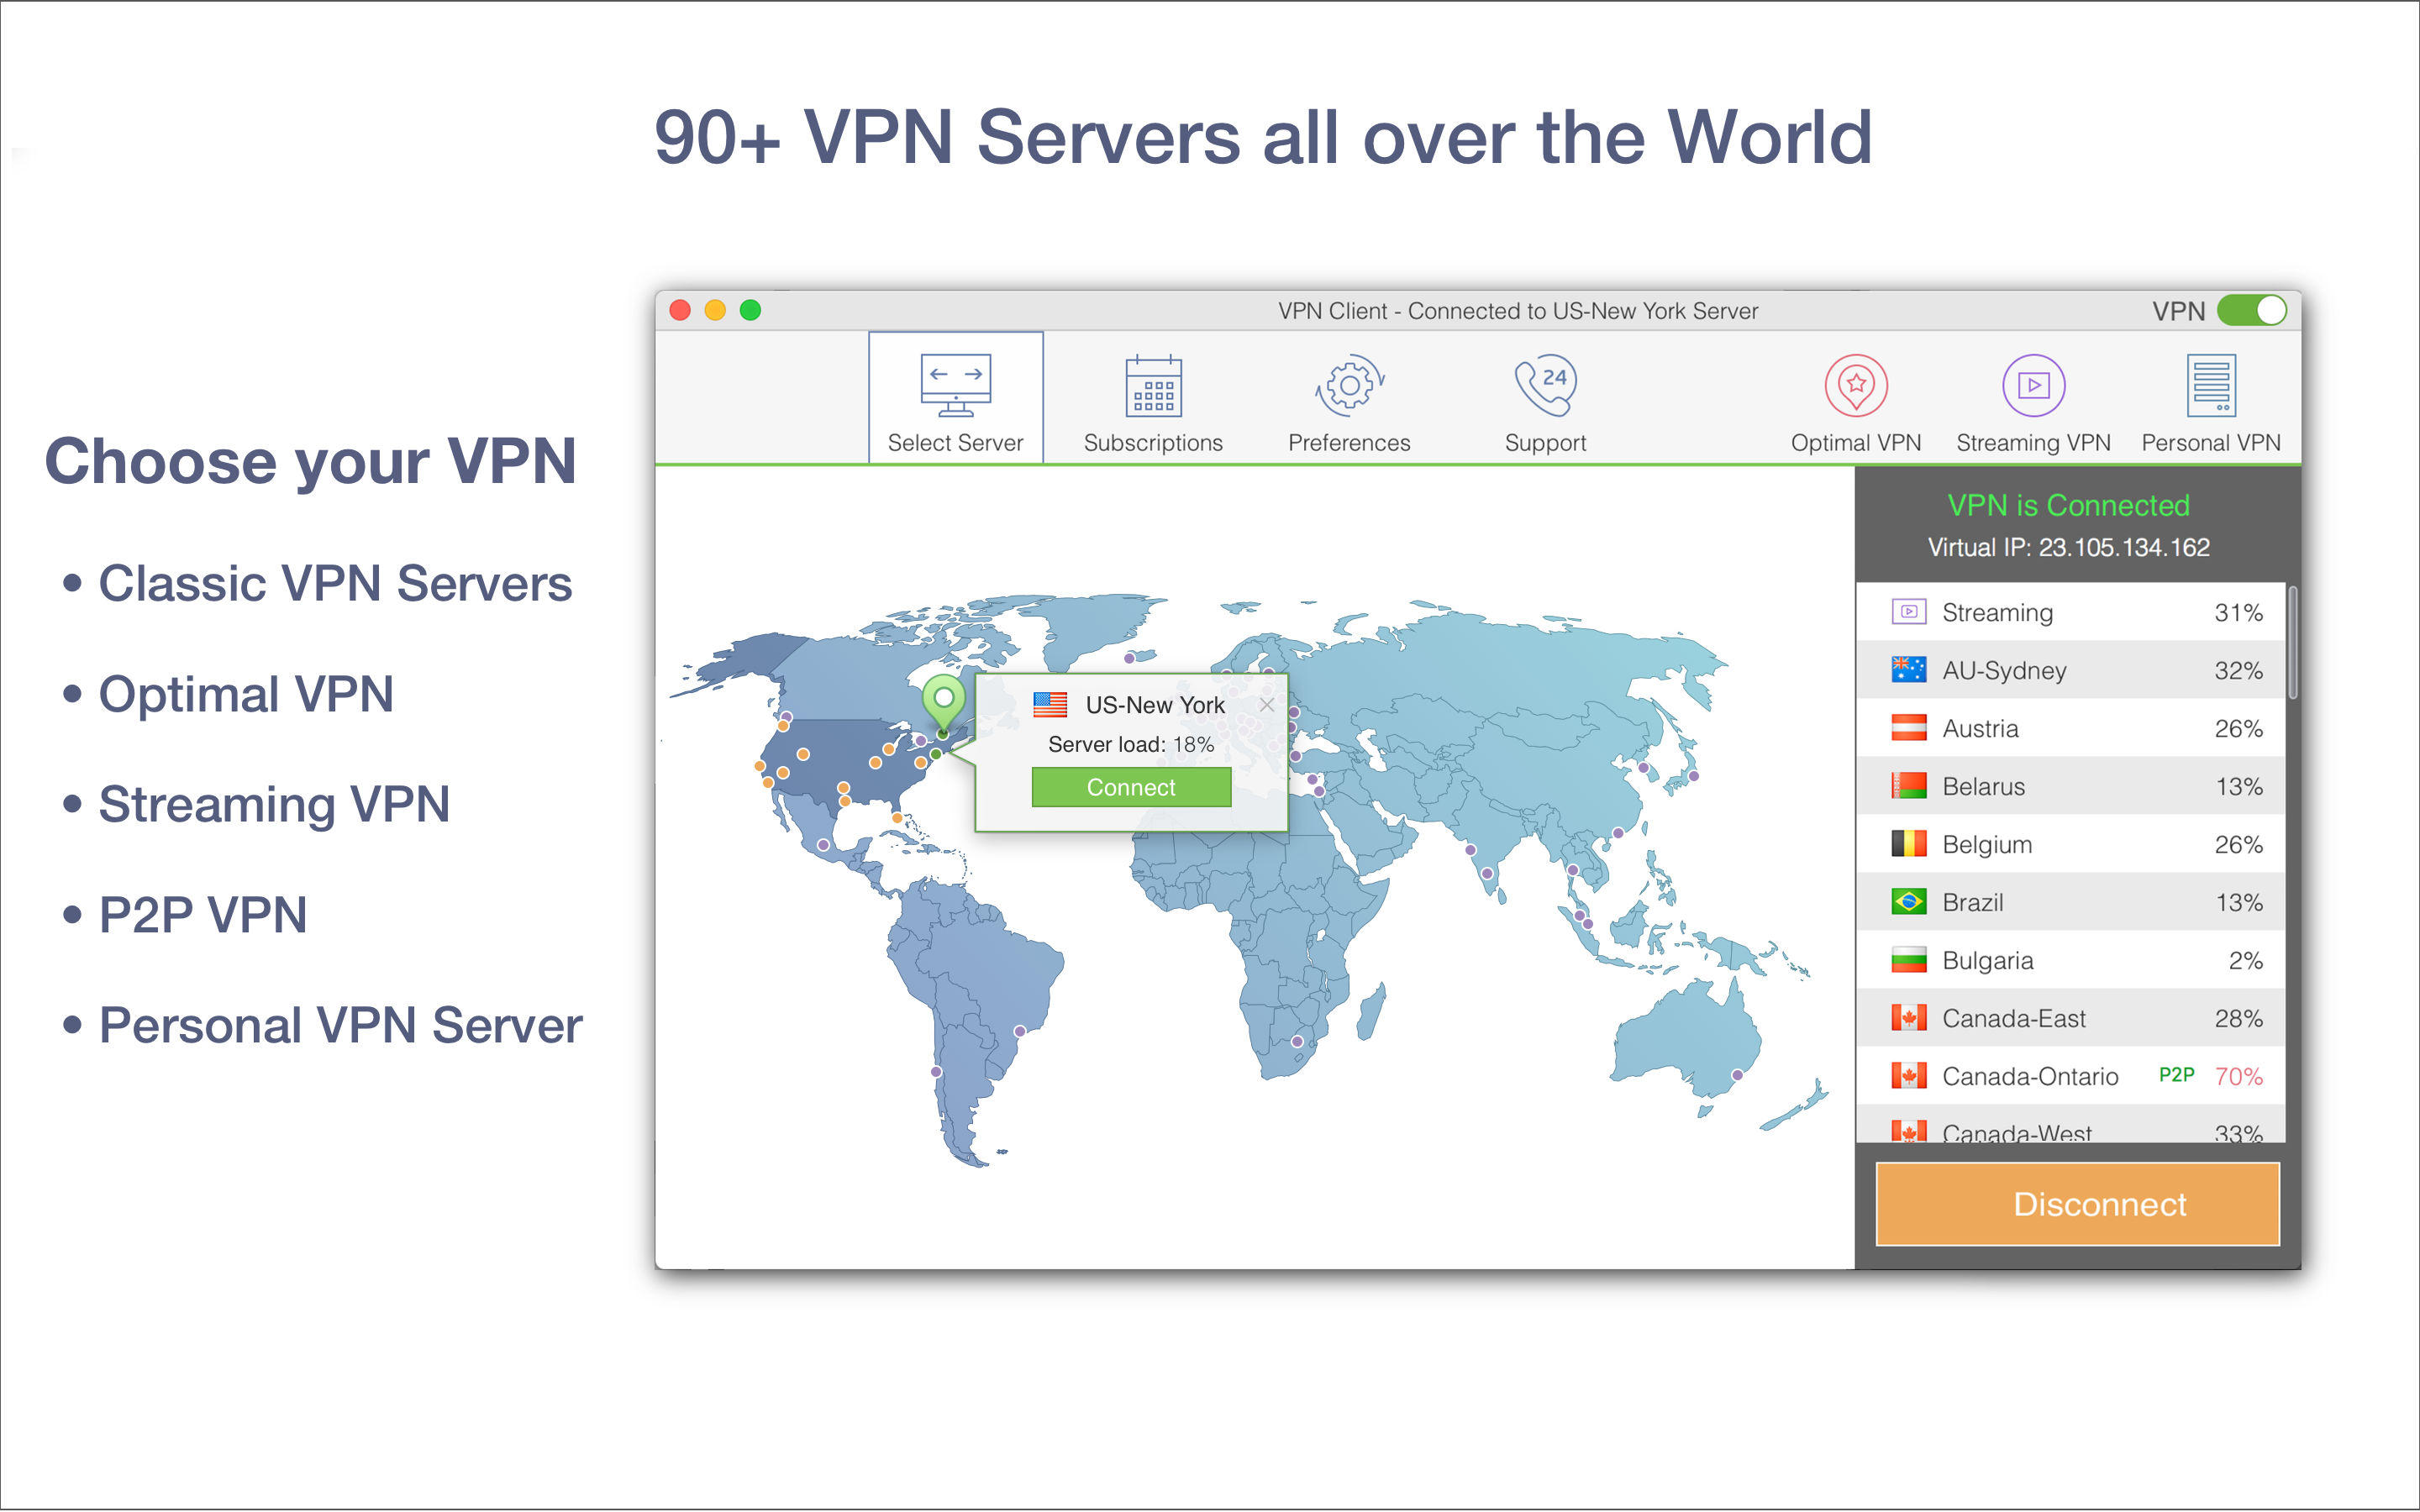 vpn client pptp for mac free